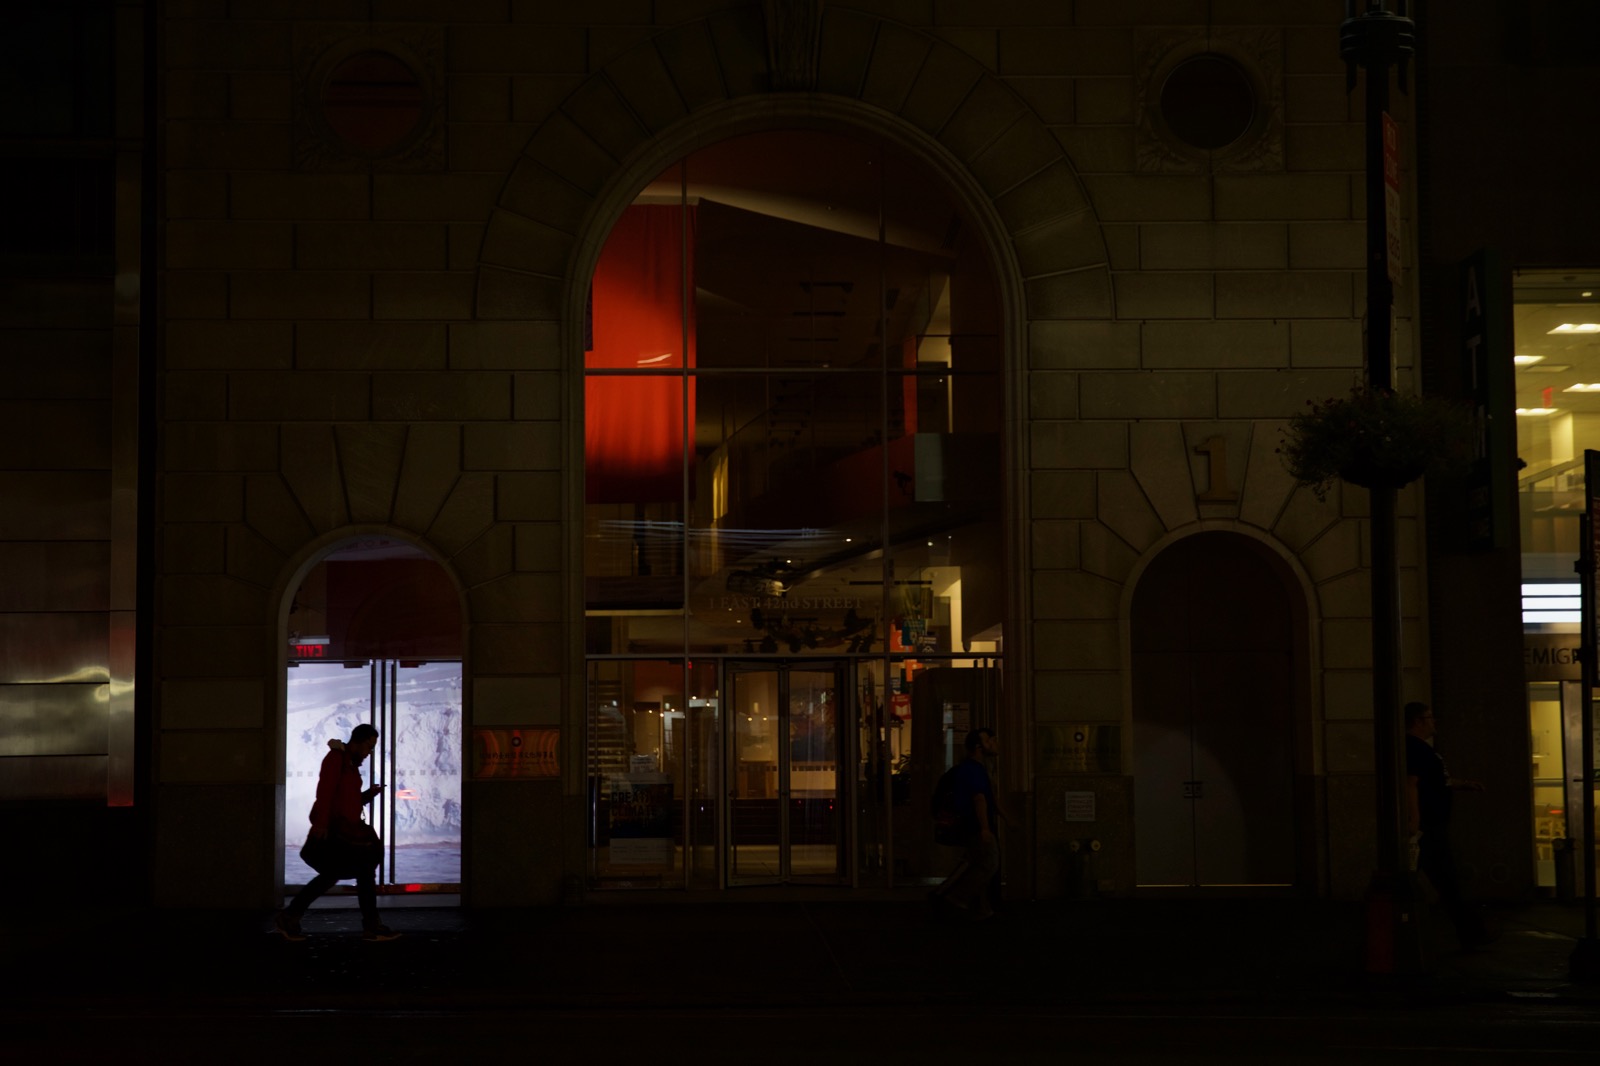 Very dark nighttime photograph of a silhouetted figure walking down the street looking at their phone. Behind him is a projected image of glaciers in a small storefront window.